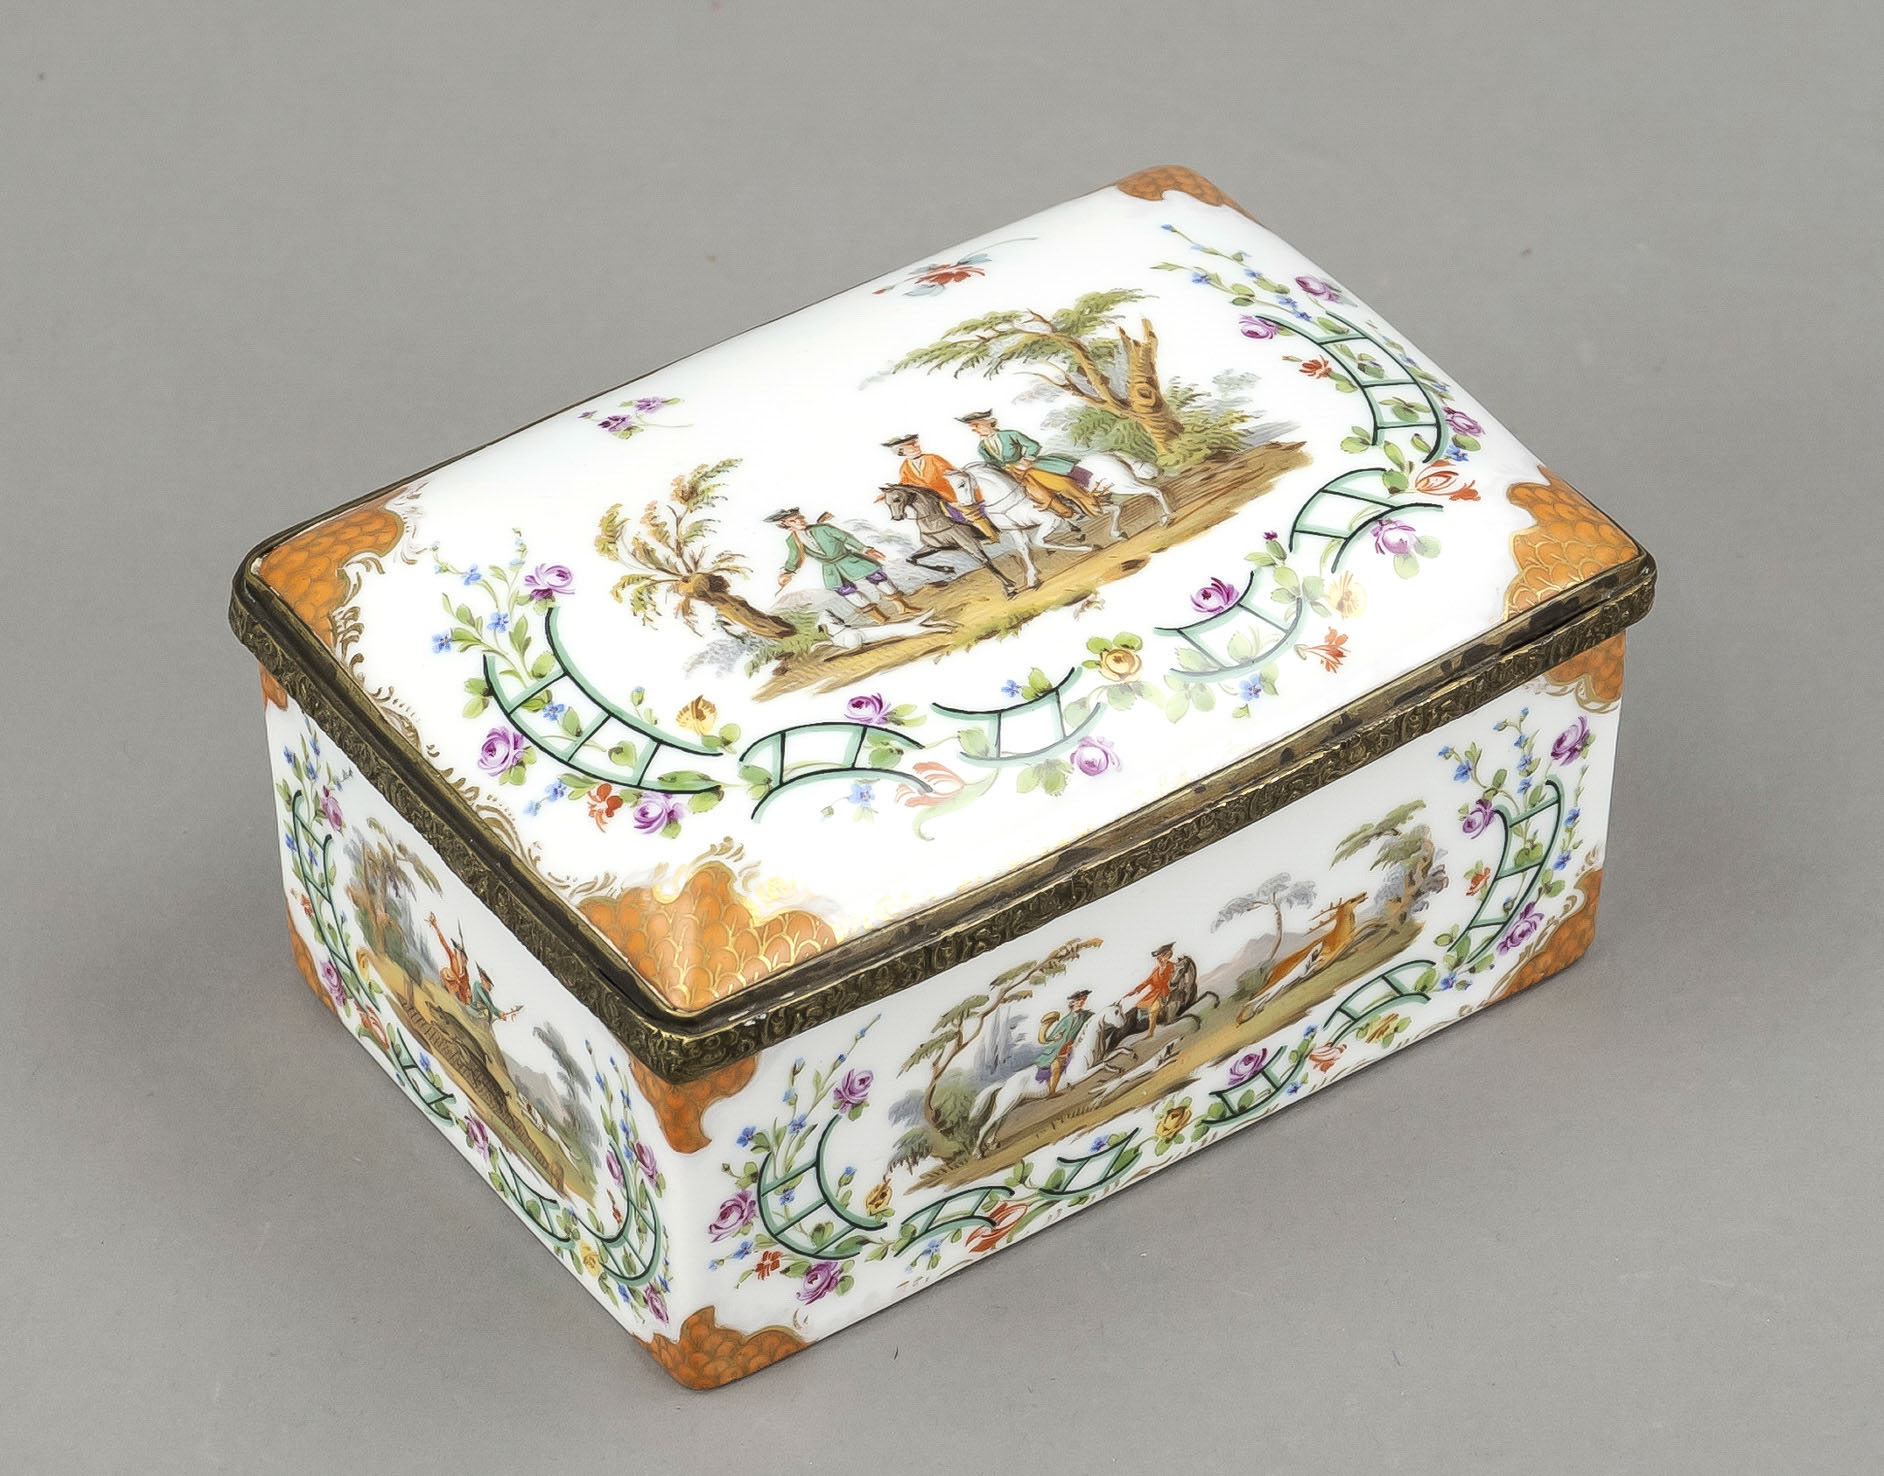 Lidded box in the style of 18th century KPM Berlin, unmarked, rectangular form with hinged, slightly